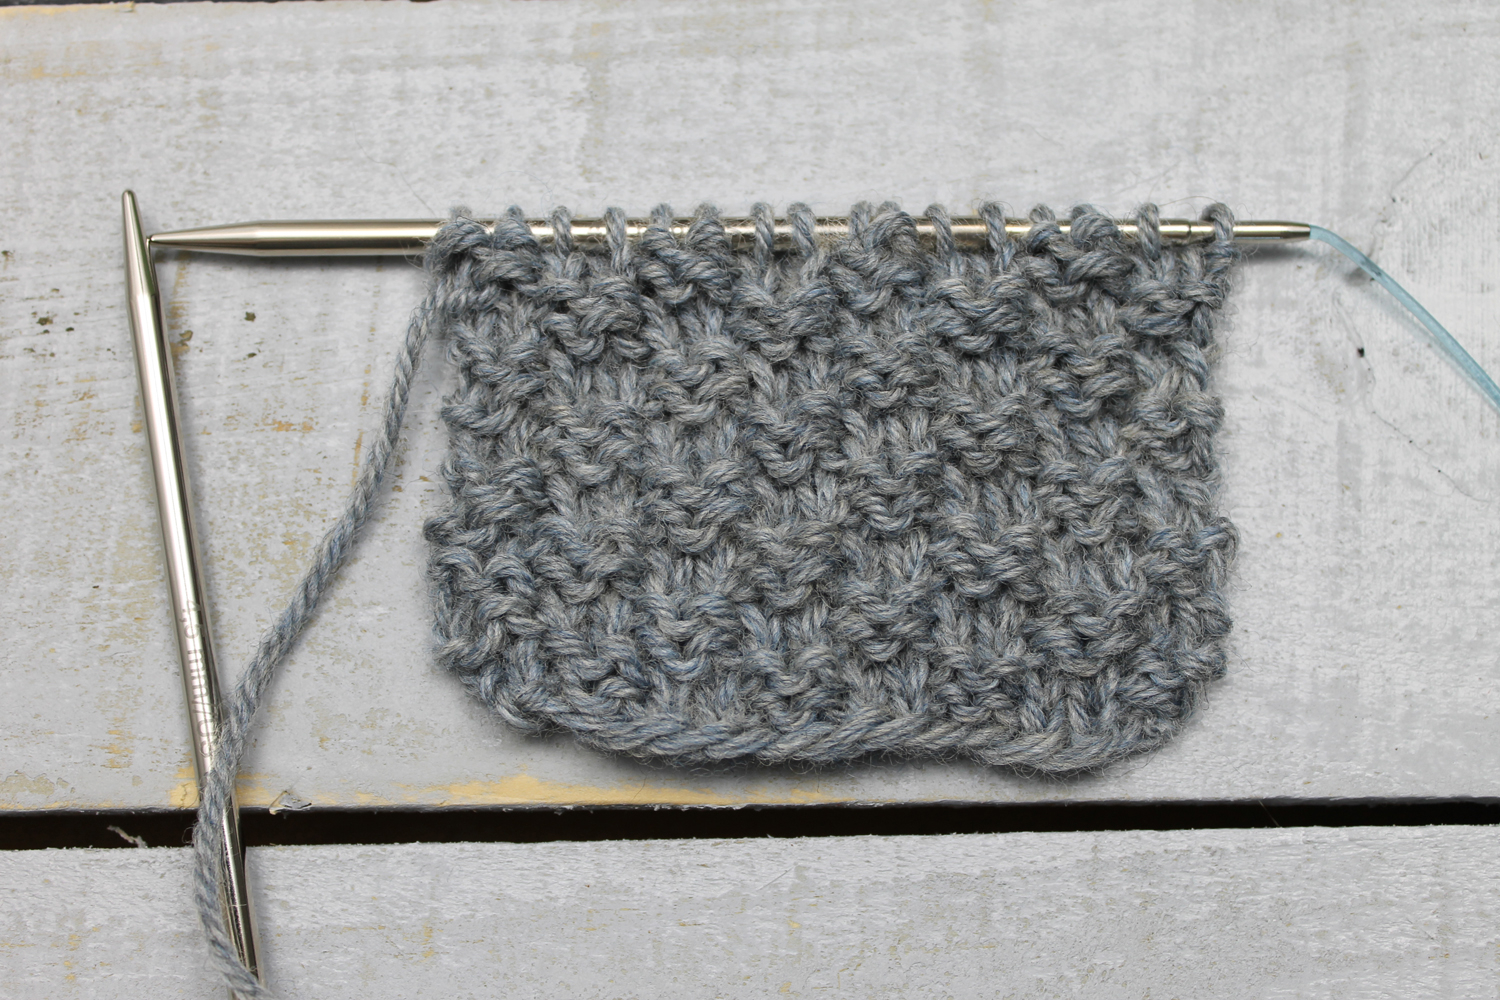 Knit Texture Patterns How To Knit The Double Seed Stitch